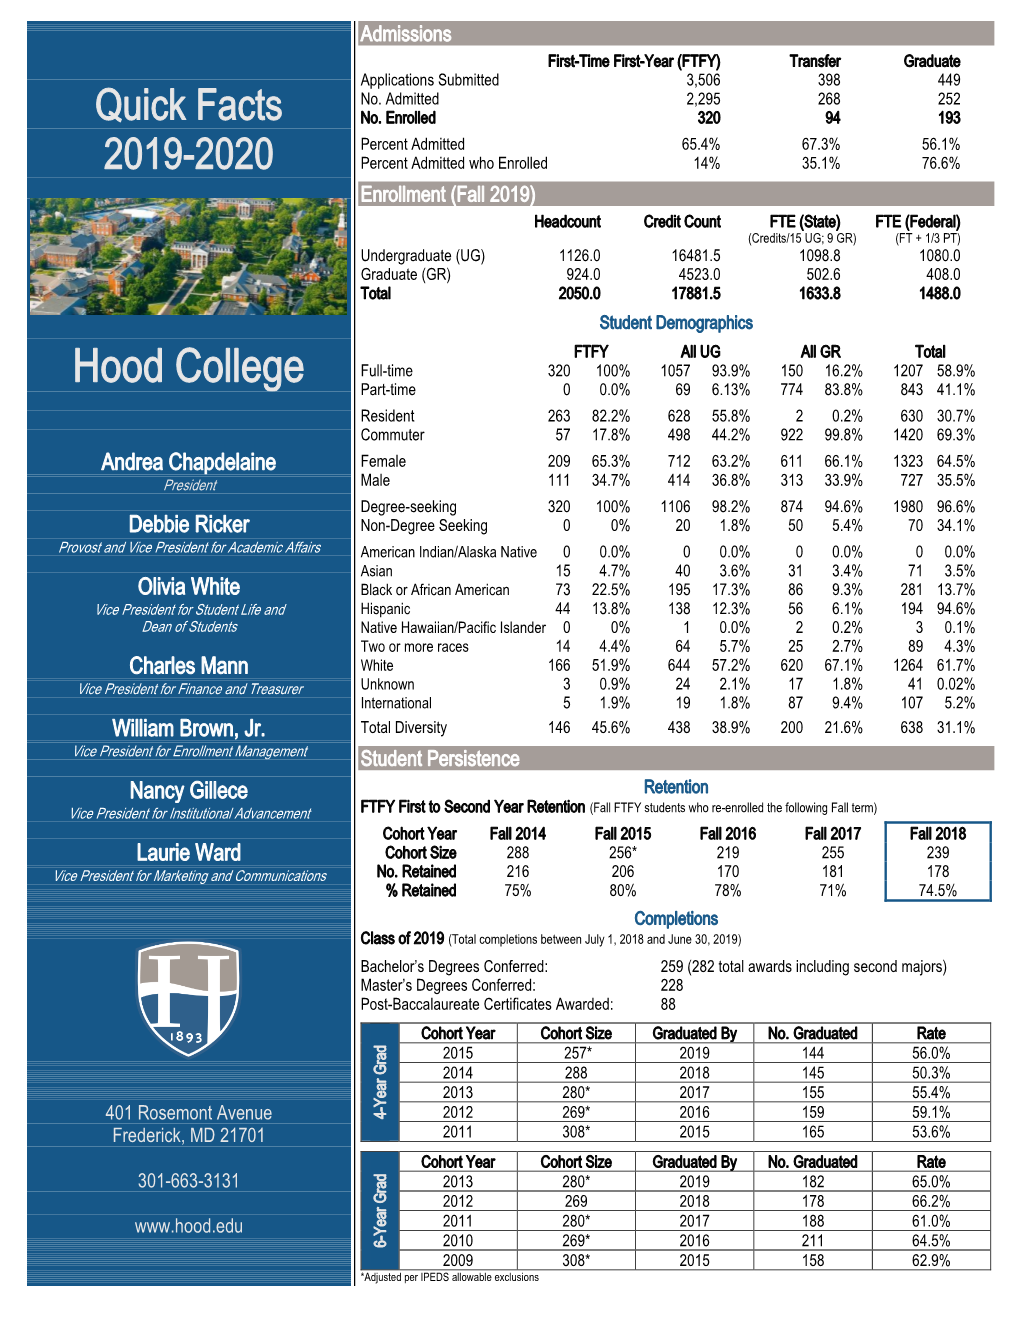 Hood College Part-Time 0 0.0% 69 6.13% 774 83.8% 843 41.1%